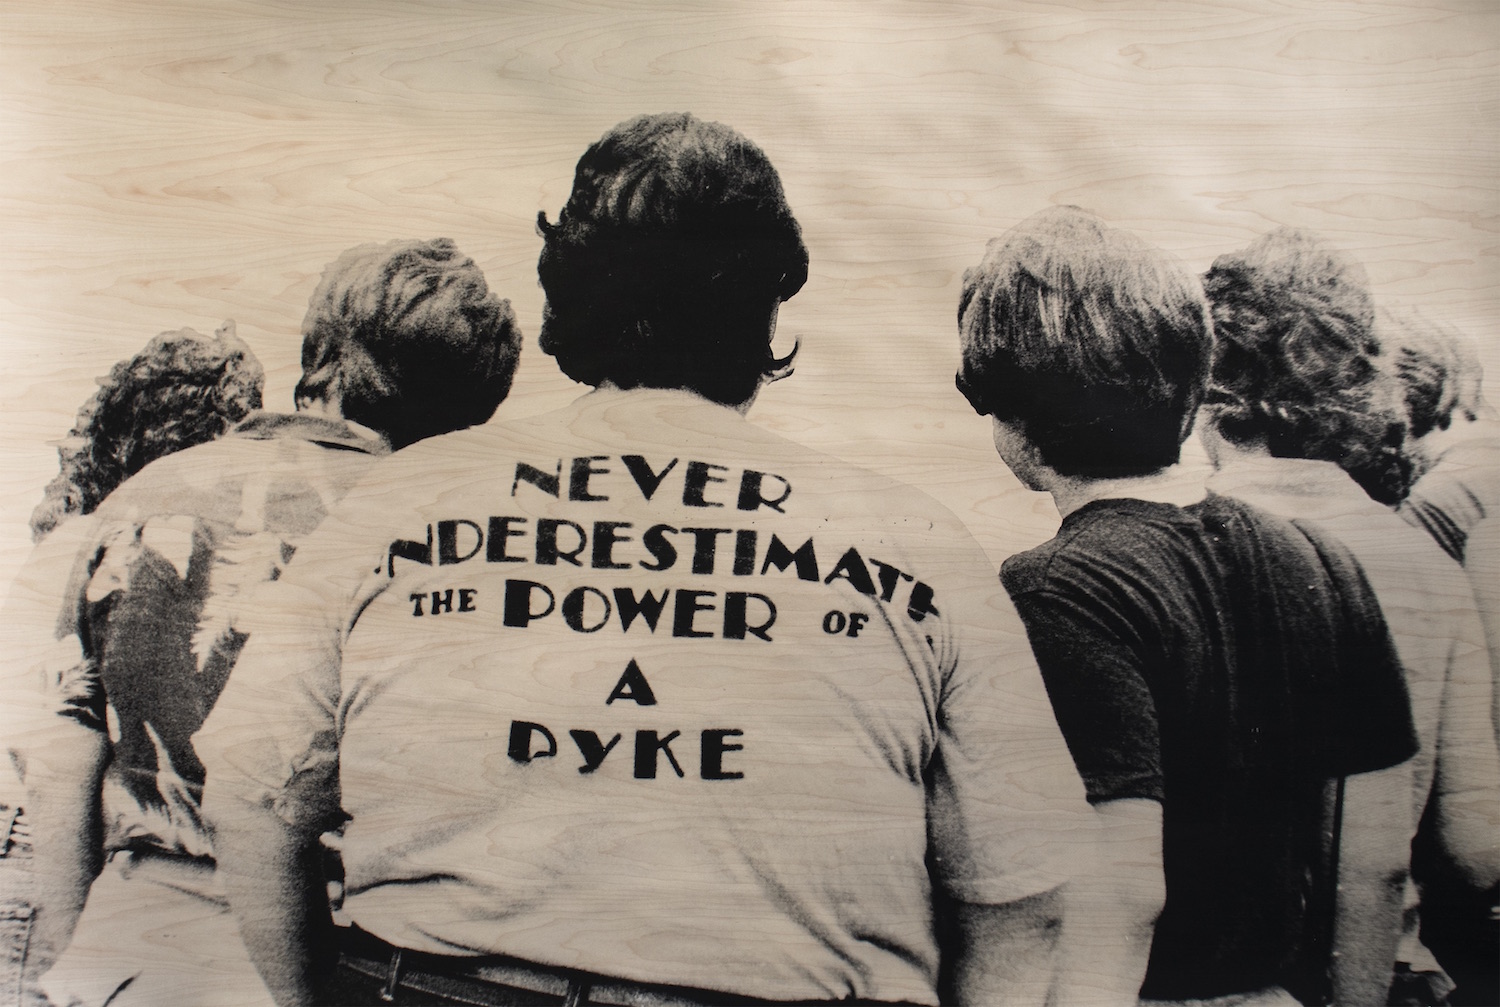 Never Underestimate the Power of a Dyke (Photographer Cindy Clark of Womenâ€™s Quarterly Journal), 2018. Maple Veneer, & Ink. Courtesy of Victori + Mo and the artist.